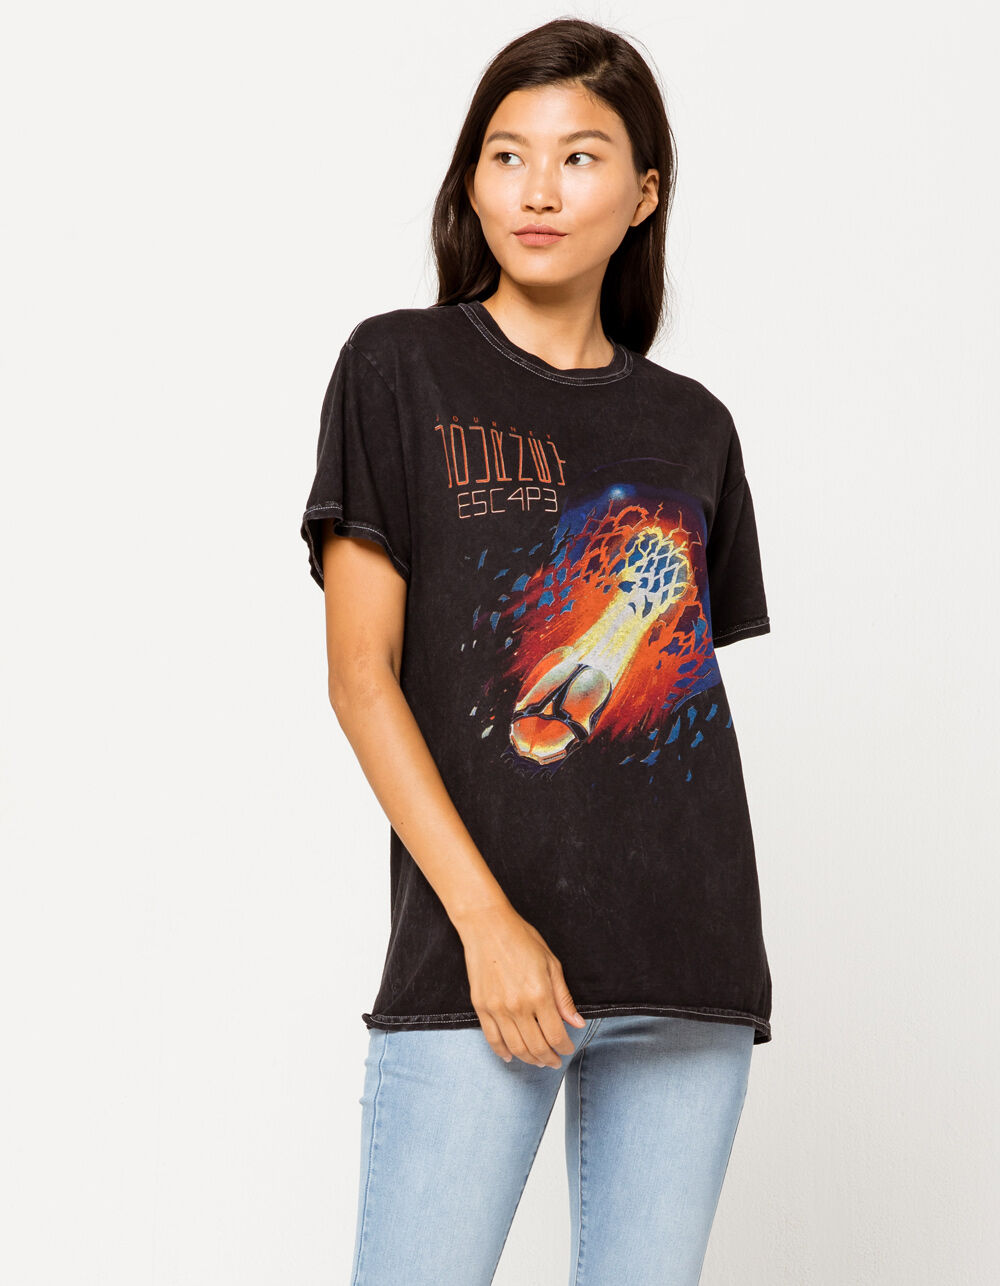 THE VINYL ICONS Journey Don't Stop Believin' Womens Tee - BLACK | Tillys